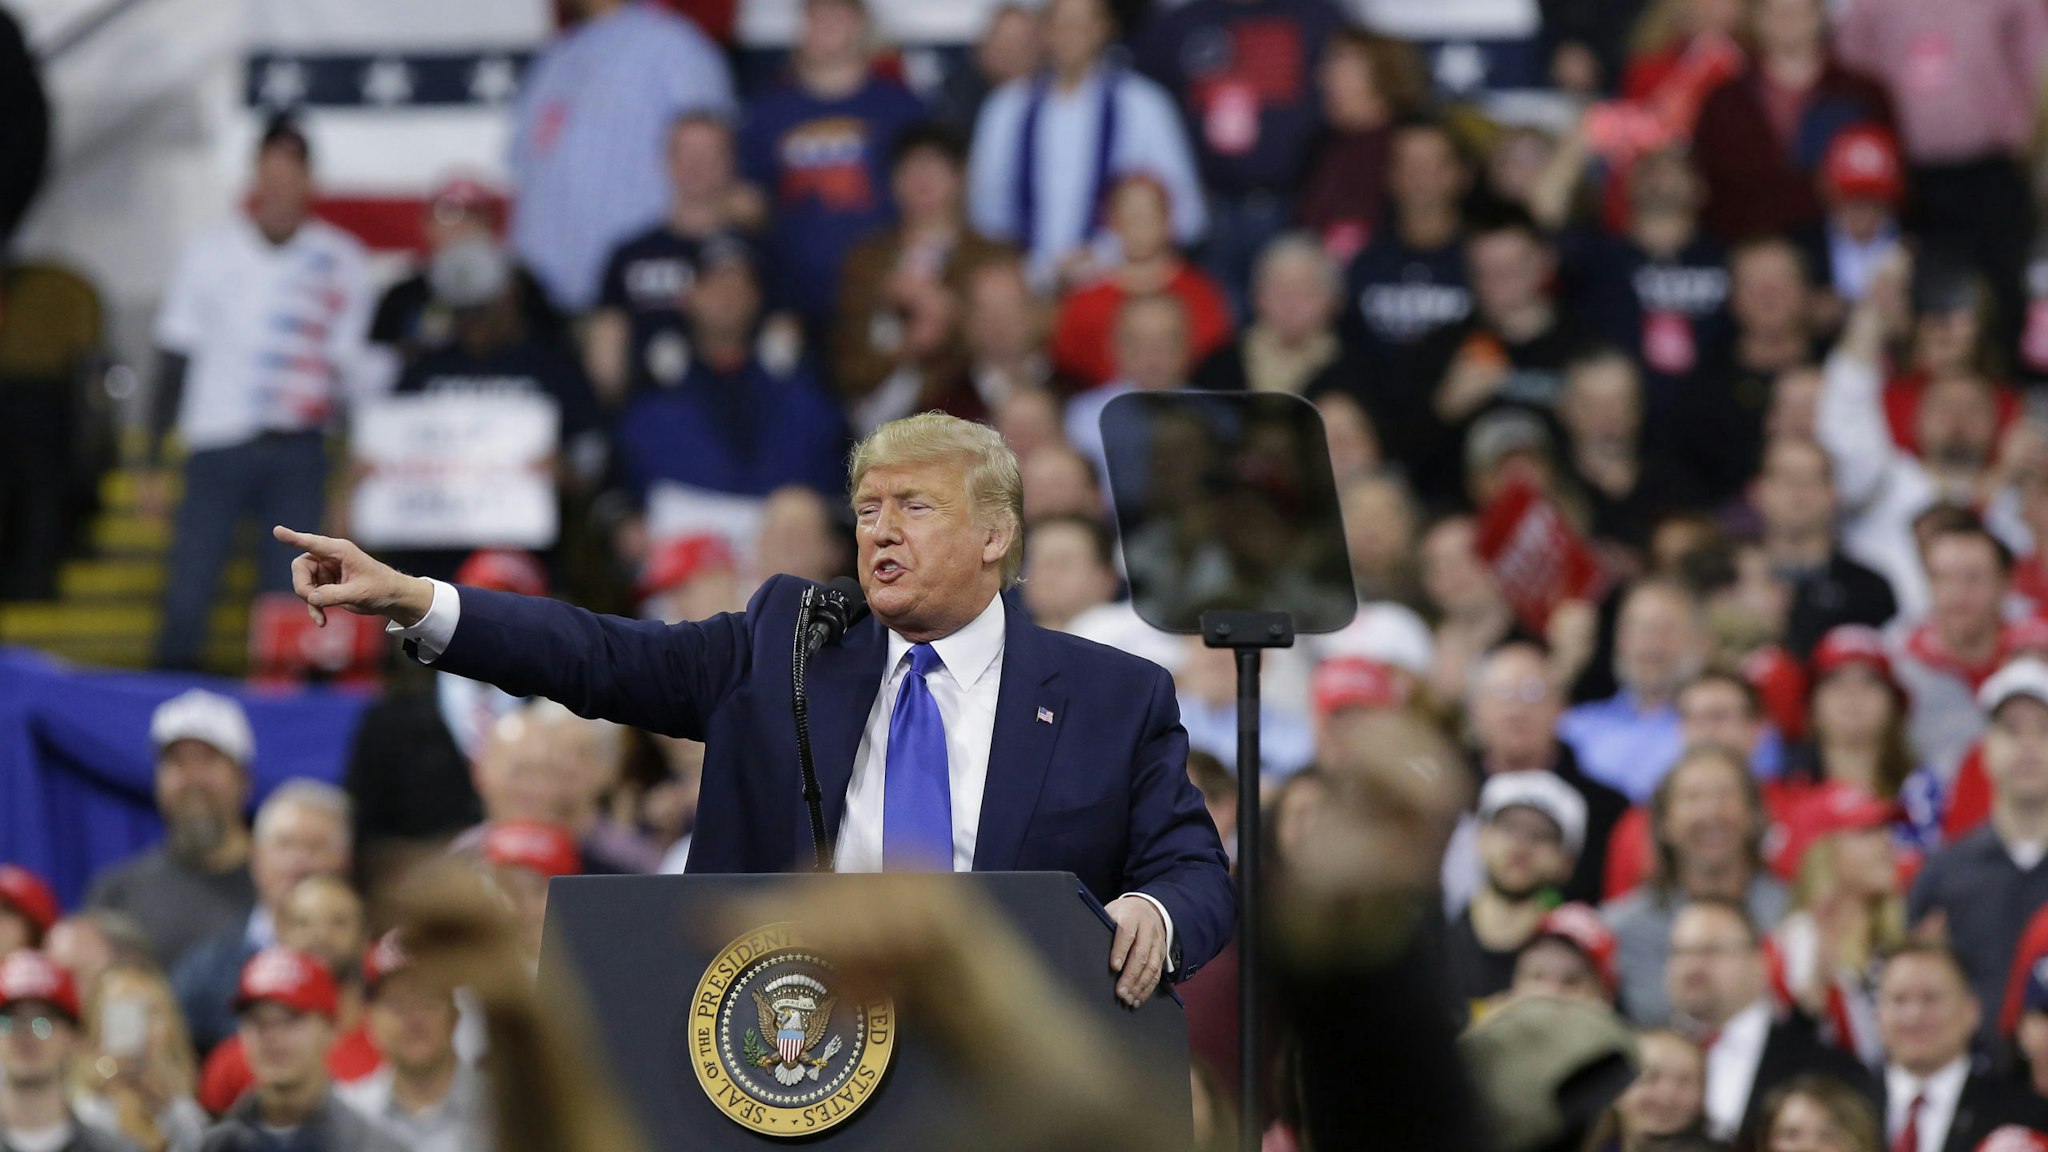 MILWAUKEE, WI - JANUARY 14: U.S. President Donald Trump speaks during a rally on January 14, 2020 at UWMilwaukee Panther Arena in Milwaukee, Wisconsin. Trump, who is the third president to face impeached, now faces an impending trial in the Senate. (Photo by Joshua Lott/Getty Images)